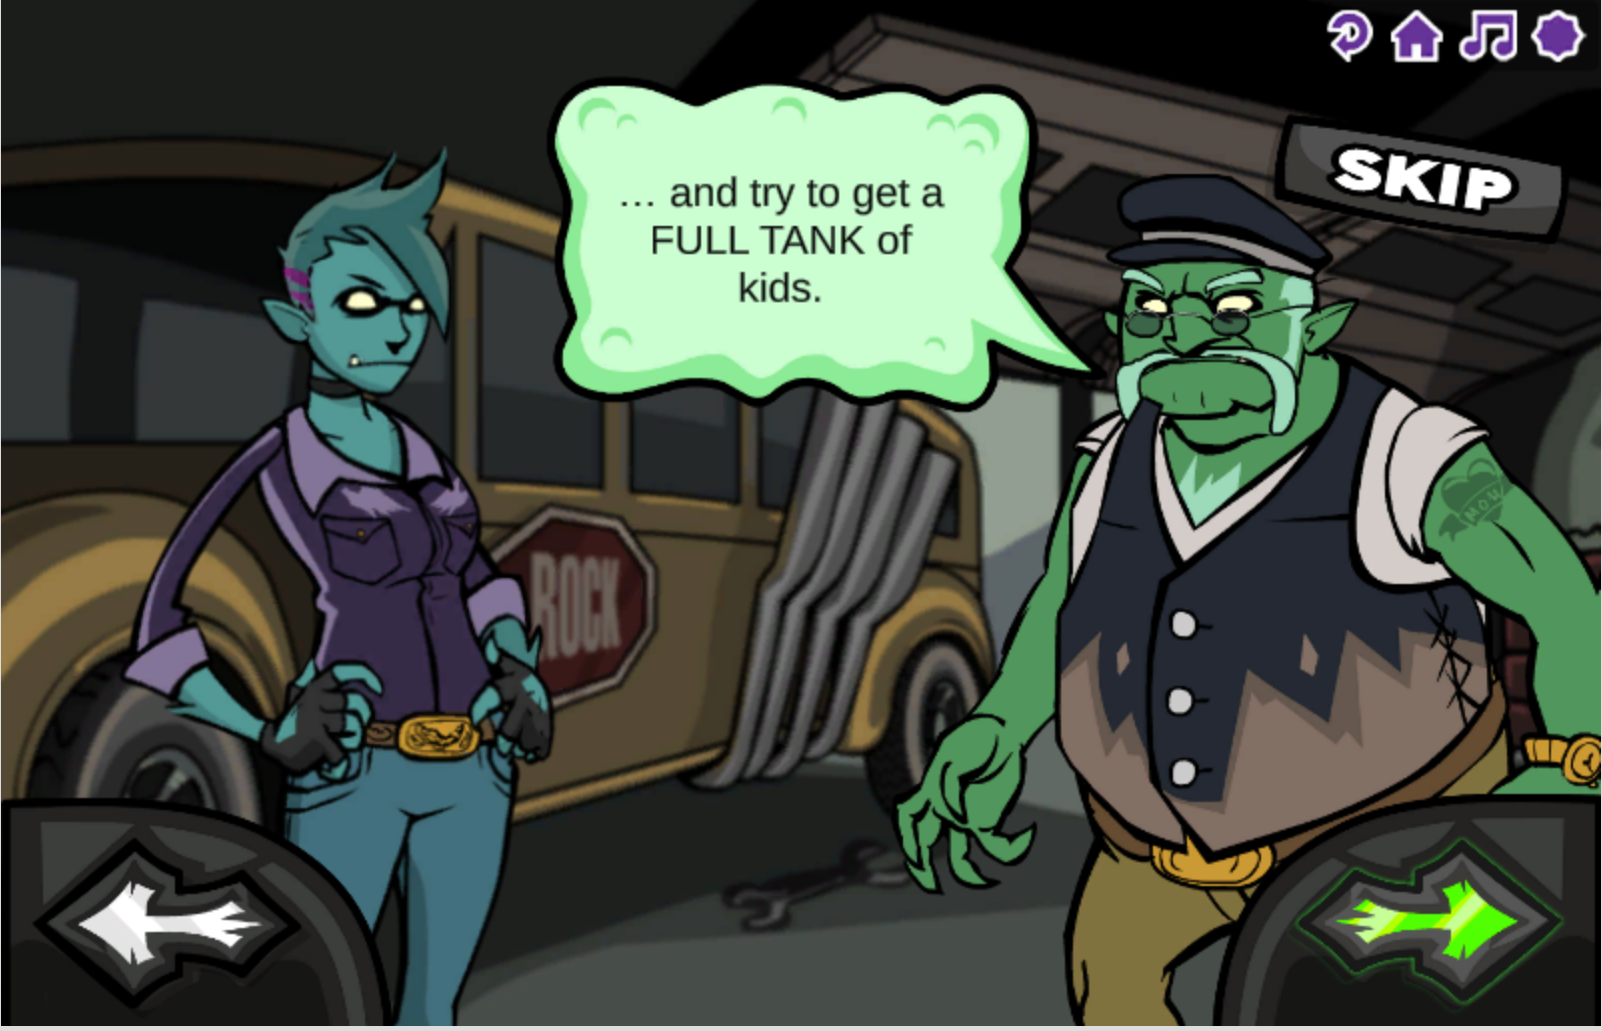 Monster School Bus introduction screenshot of two characters and the goal of the game.